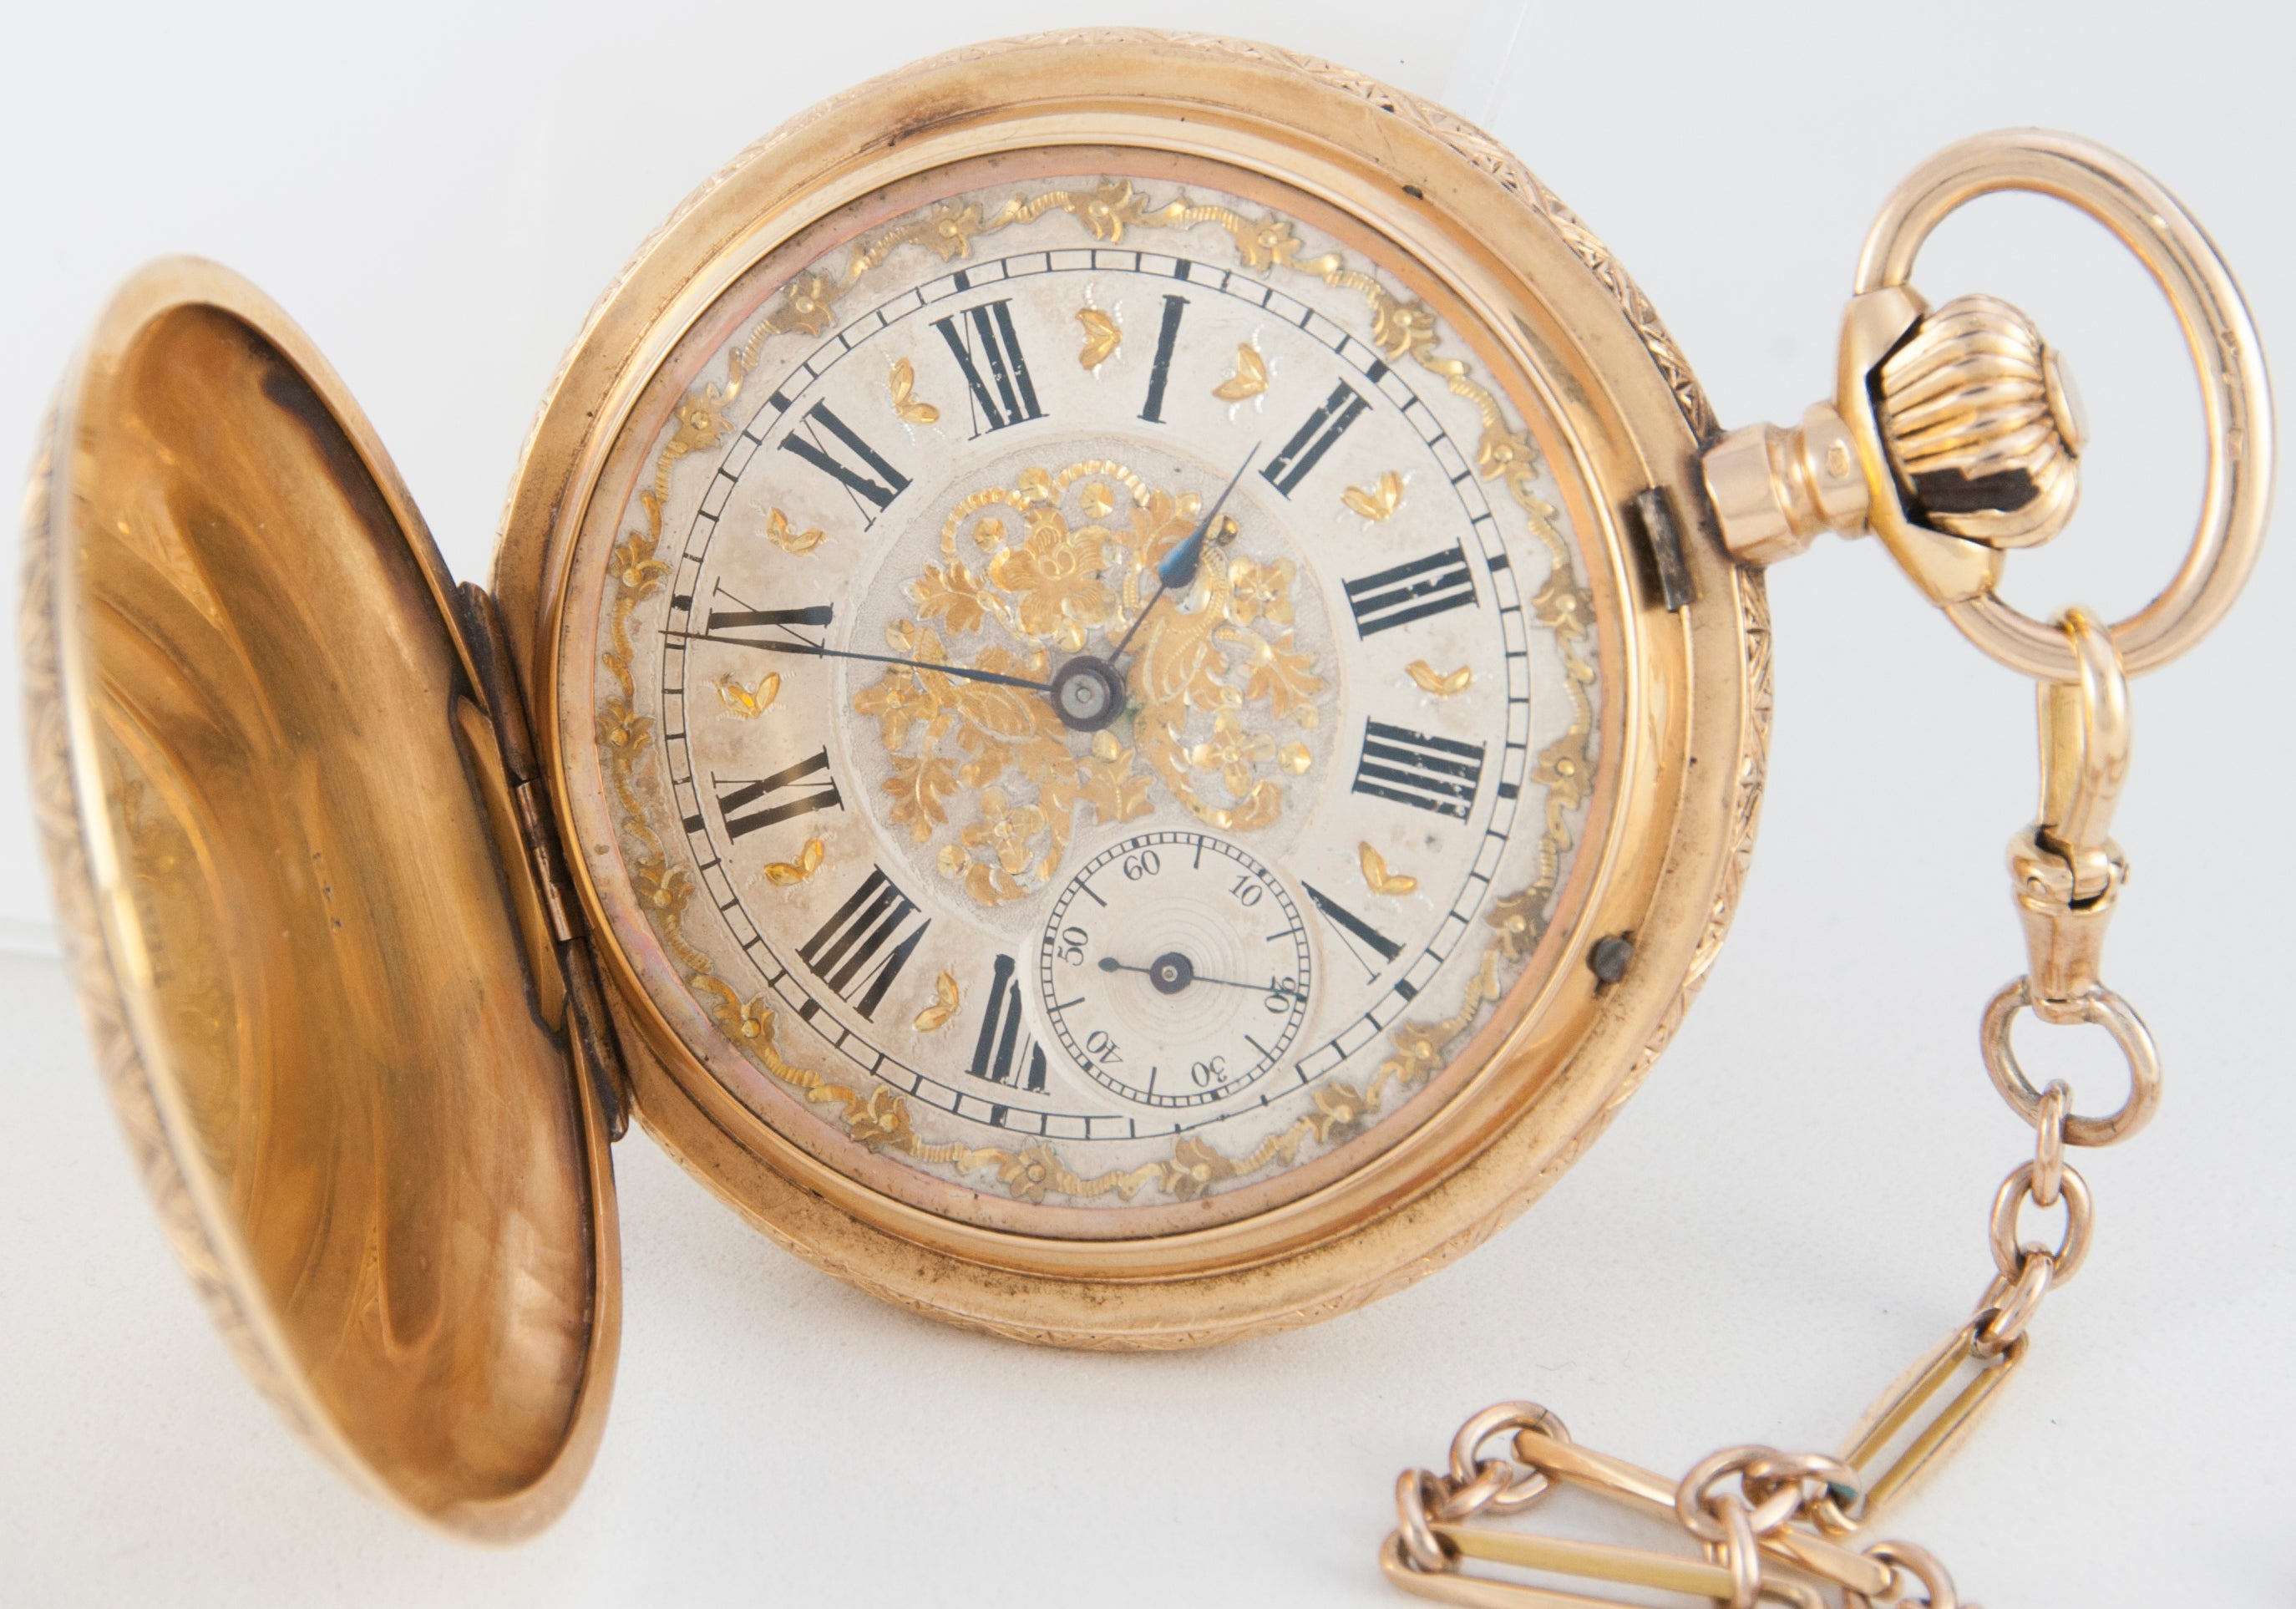 C.J & A.Perrenoud & Cie Pocket Watch Yellow Gold 18k - Circa 1885 - WATCH CHAIN NOT INCLUDED